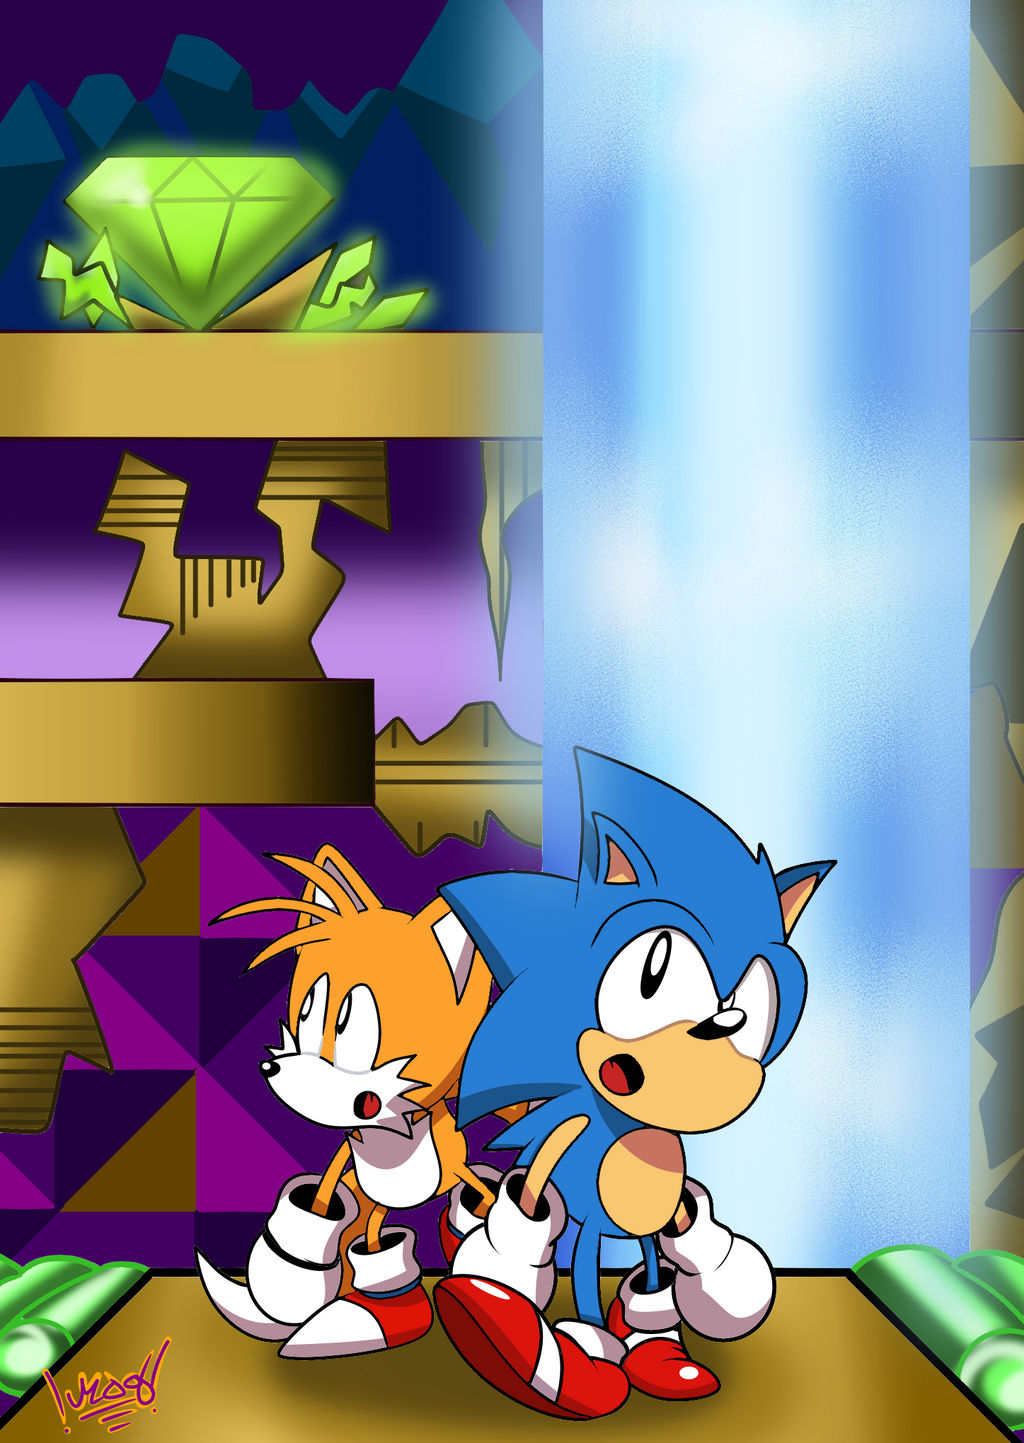 Hidden Palace - Sonic The Hedgehog 2 by ManiacDrawGus on DeviantArt